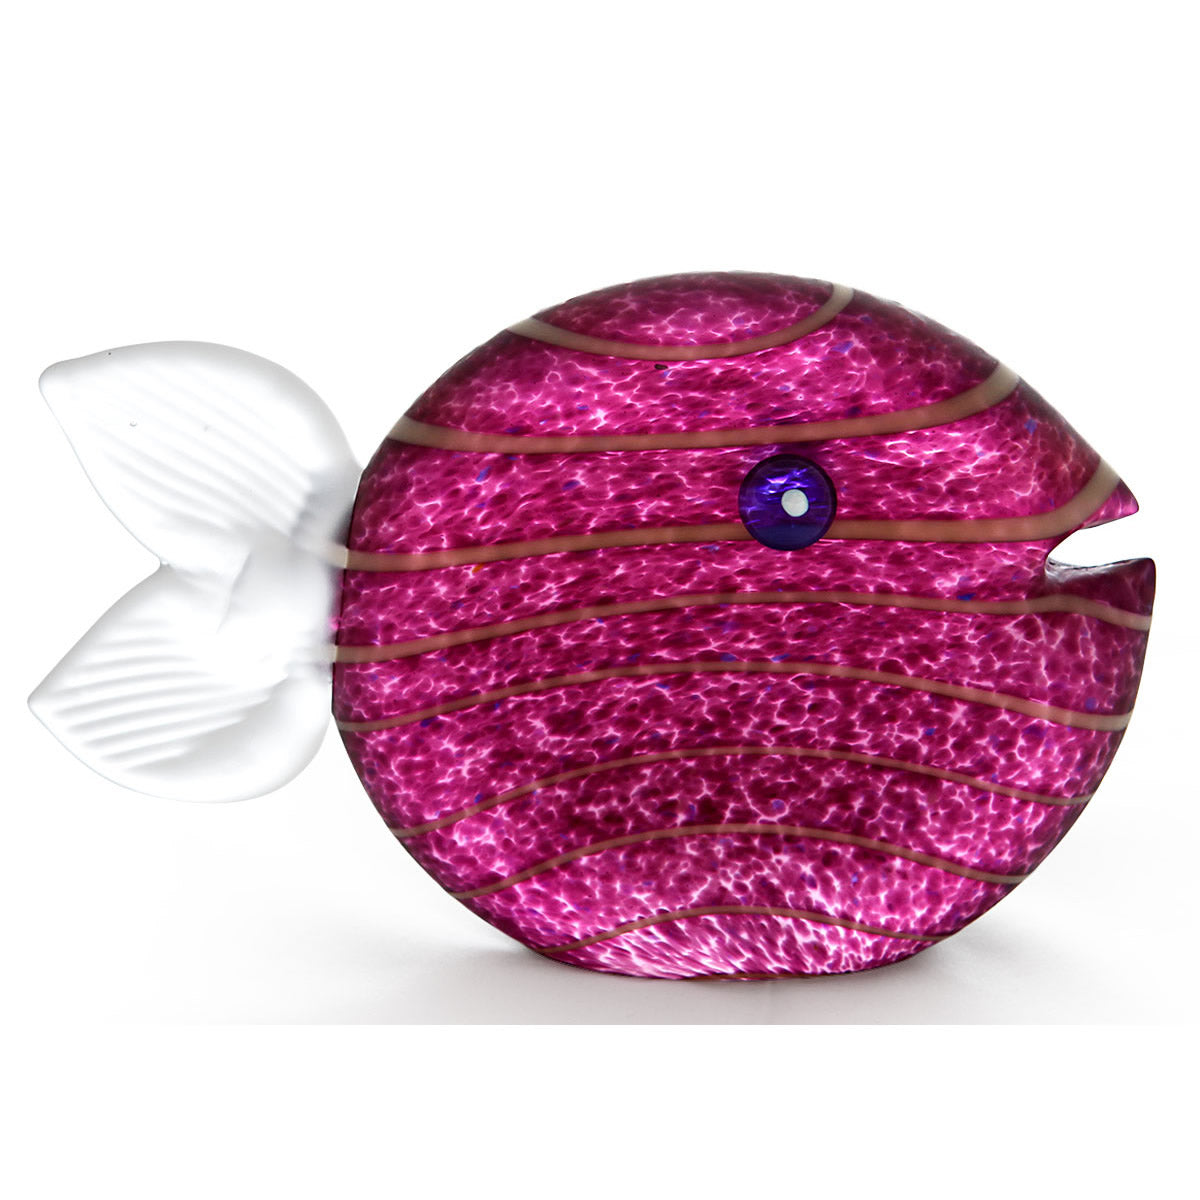 Snippy Fish Paperweight, Large/Purple- by Borowski